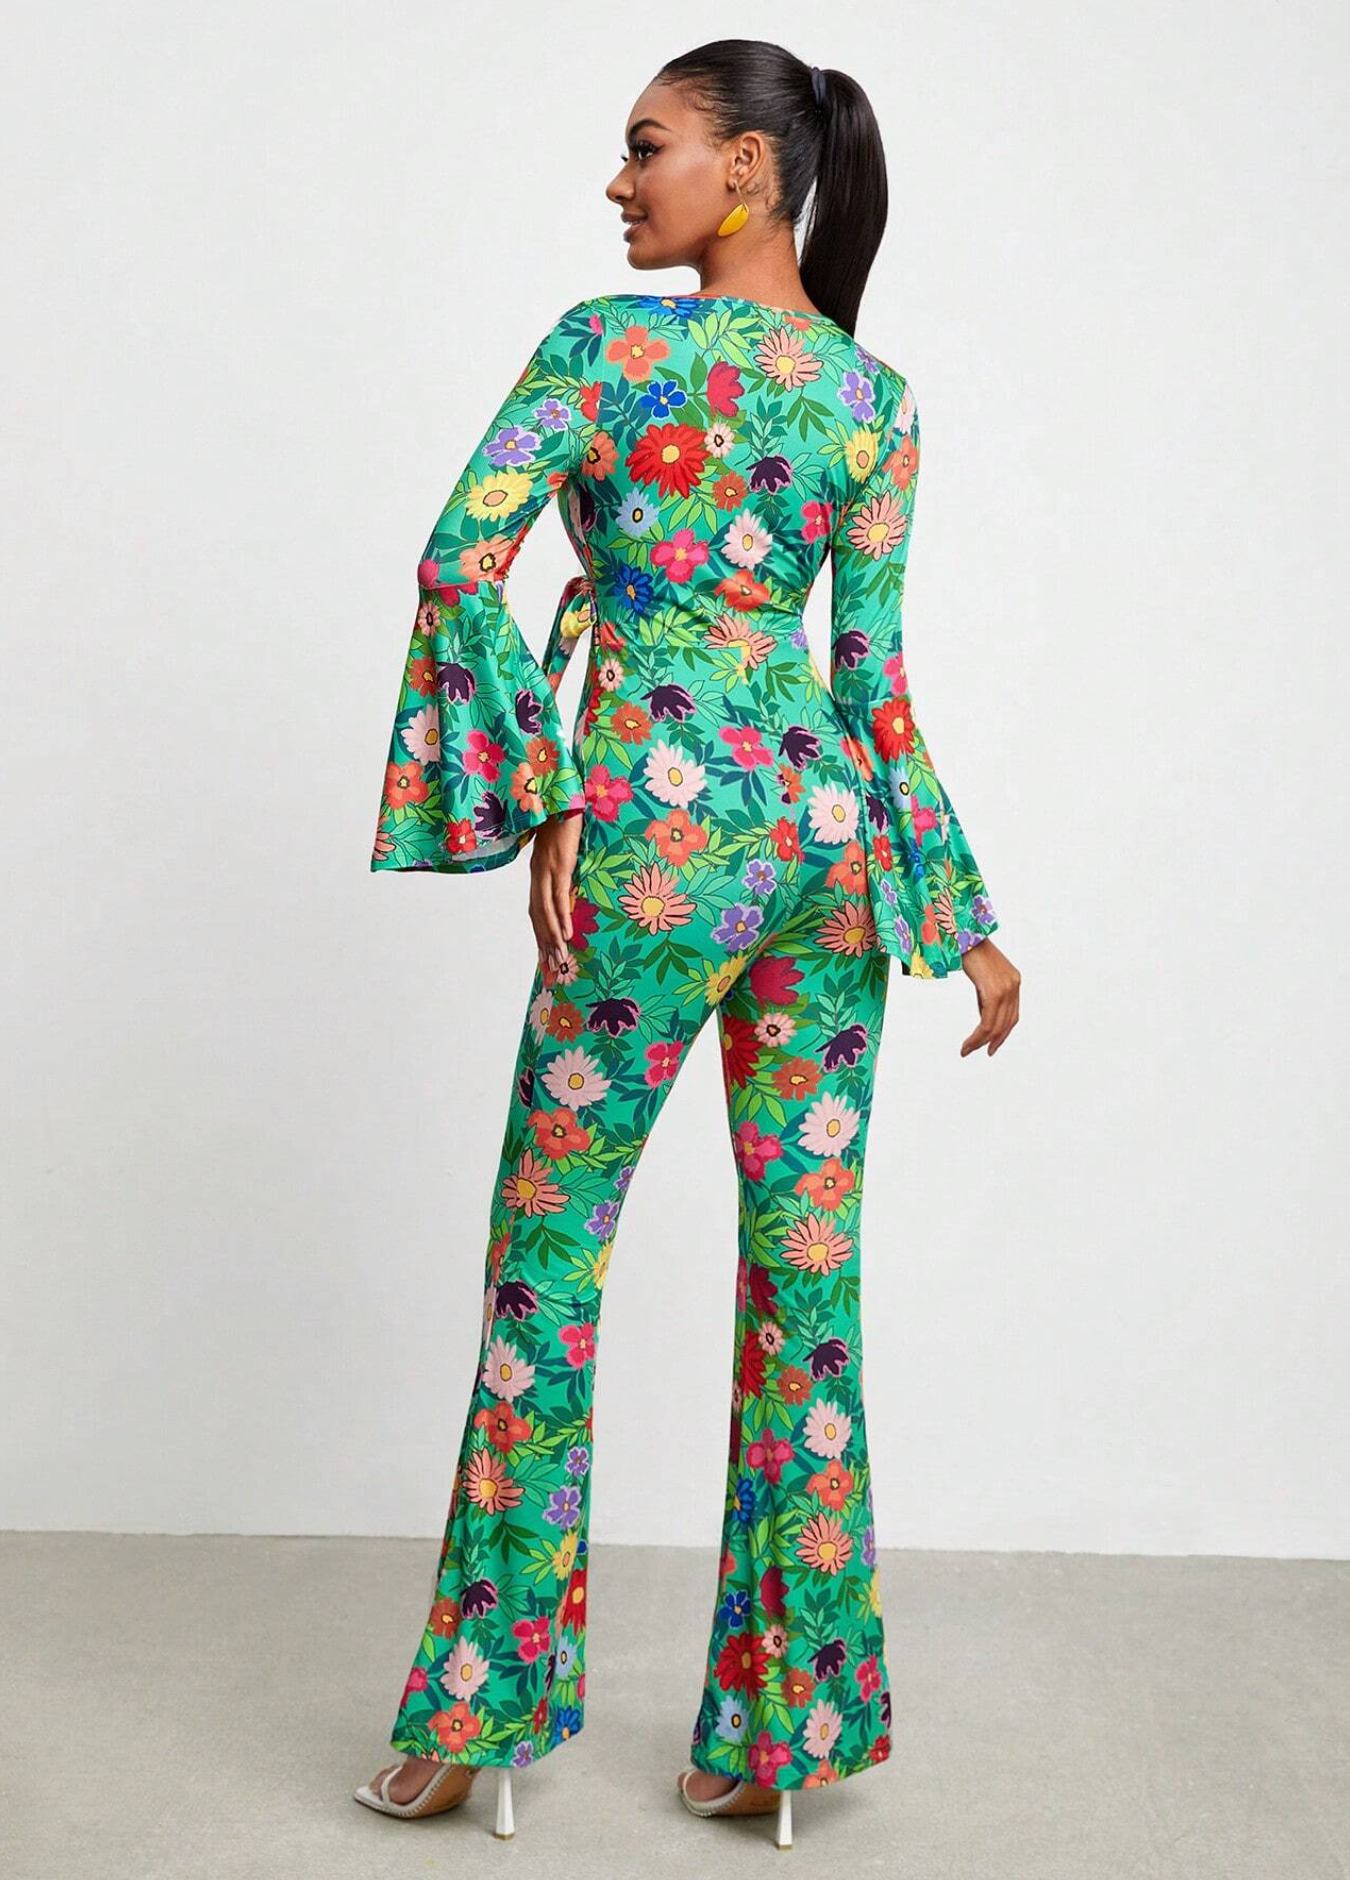 BELANGE HANDMADE X SHEIN - Floral Print Flare Leg Jumpsuit- Available on SHEIN.COM Only